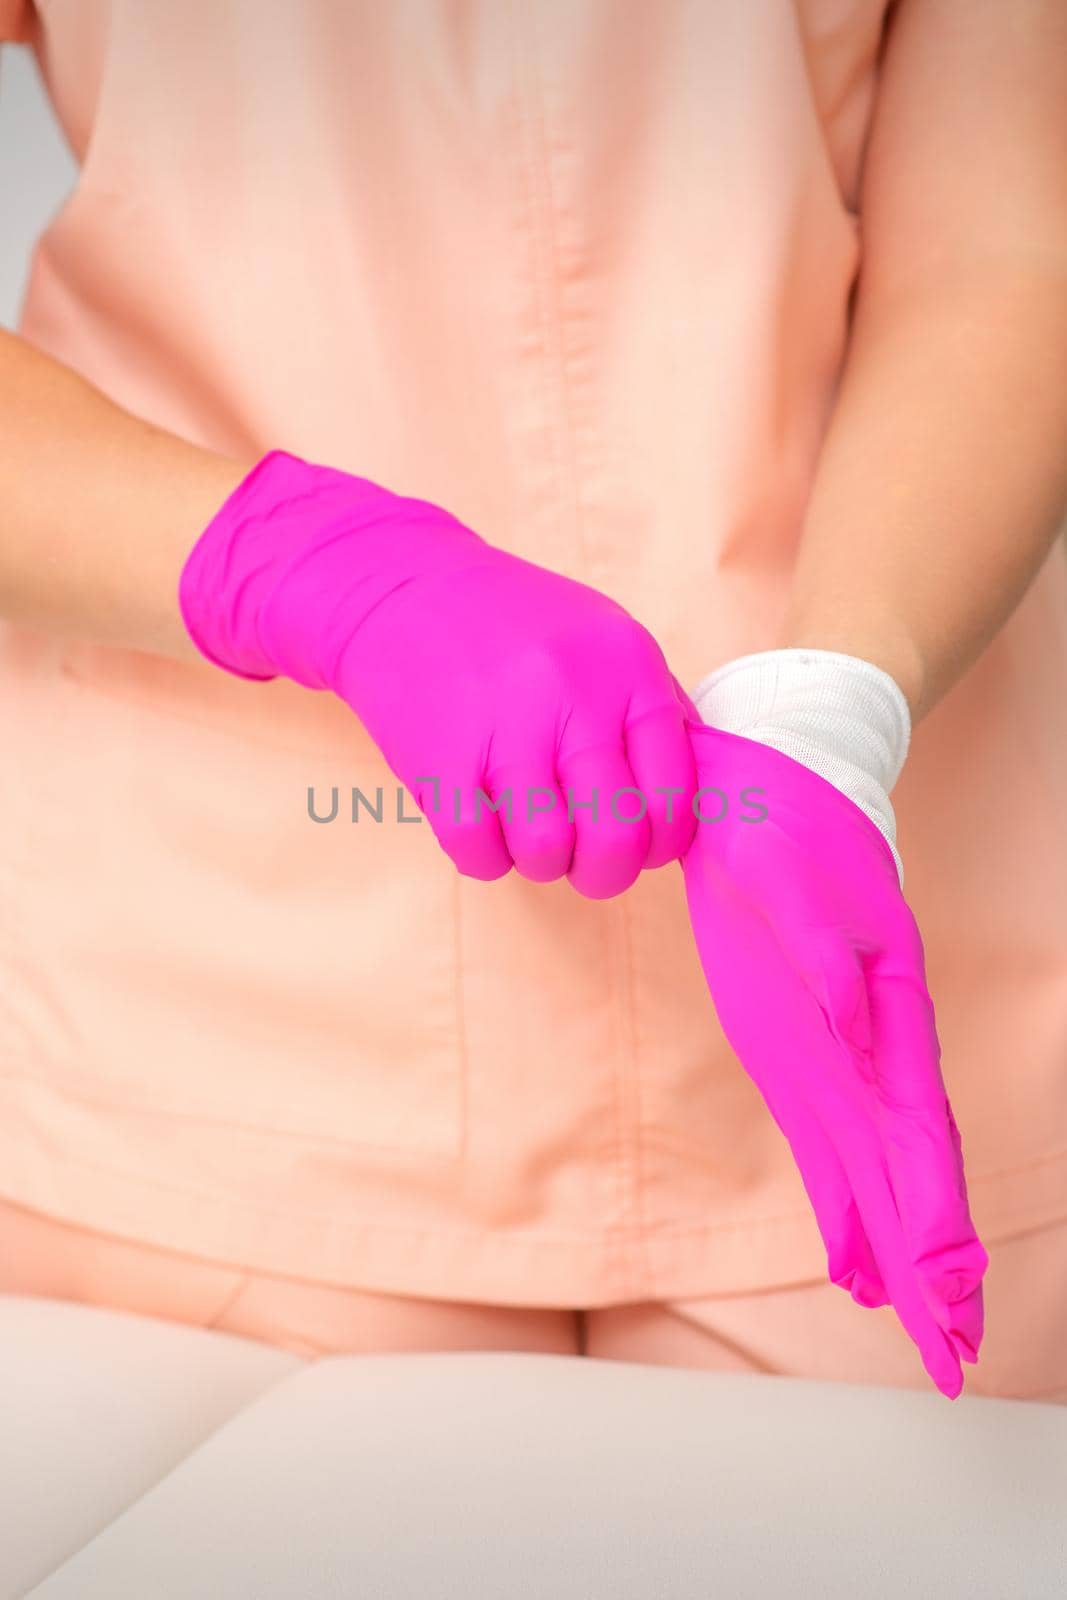 Hand of beautician puts on sterile pink gloves prepares to receive clients indoors